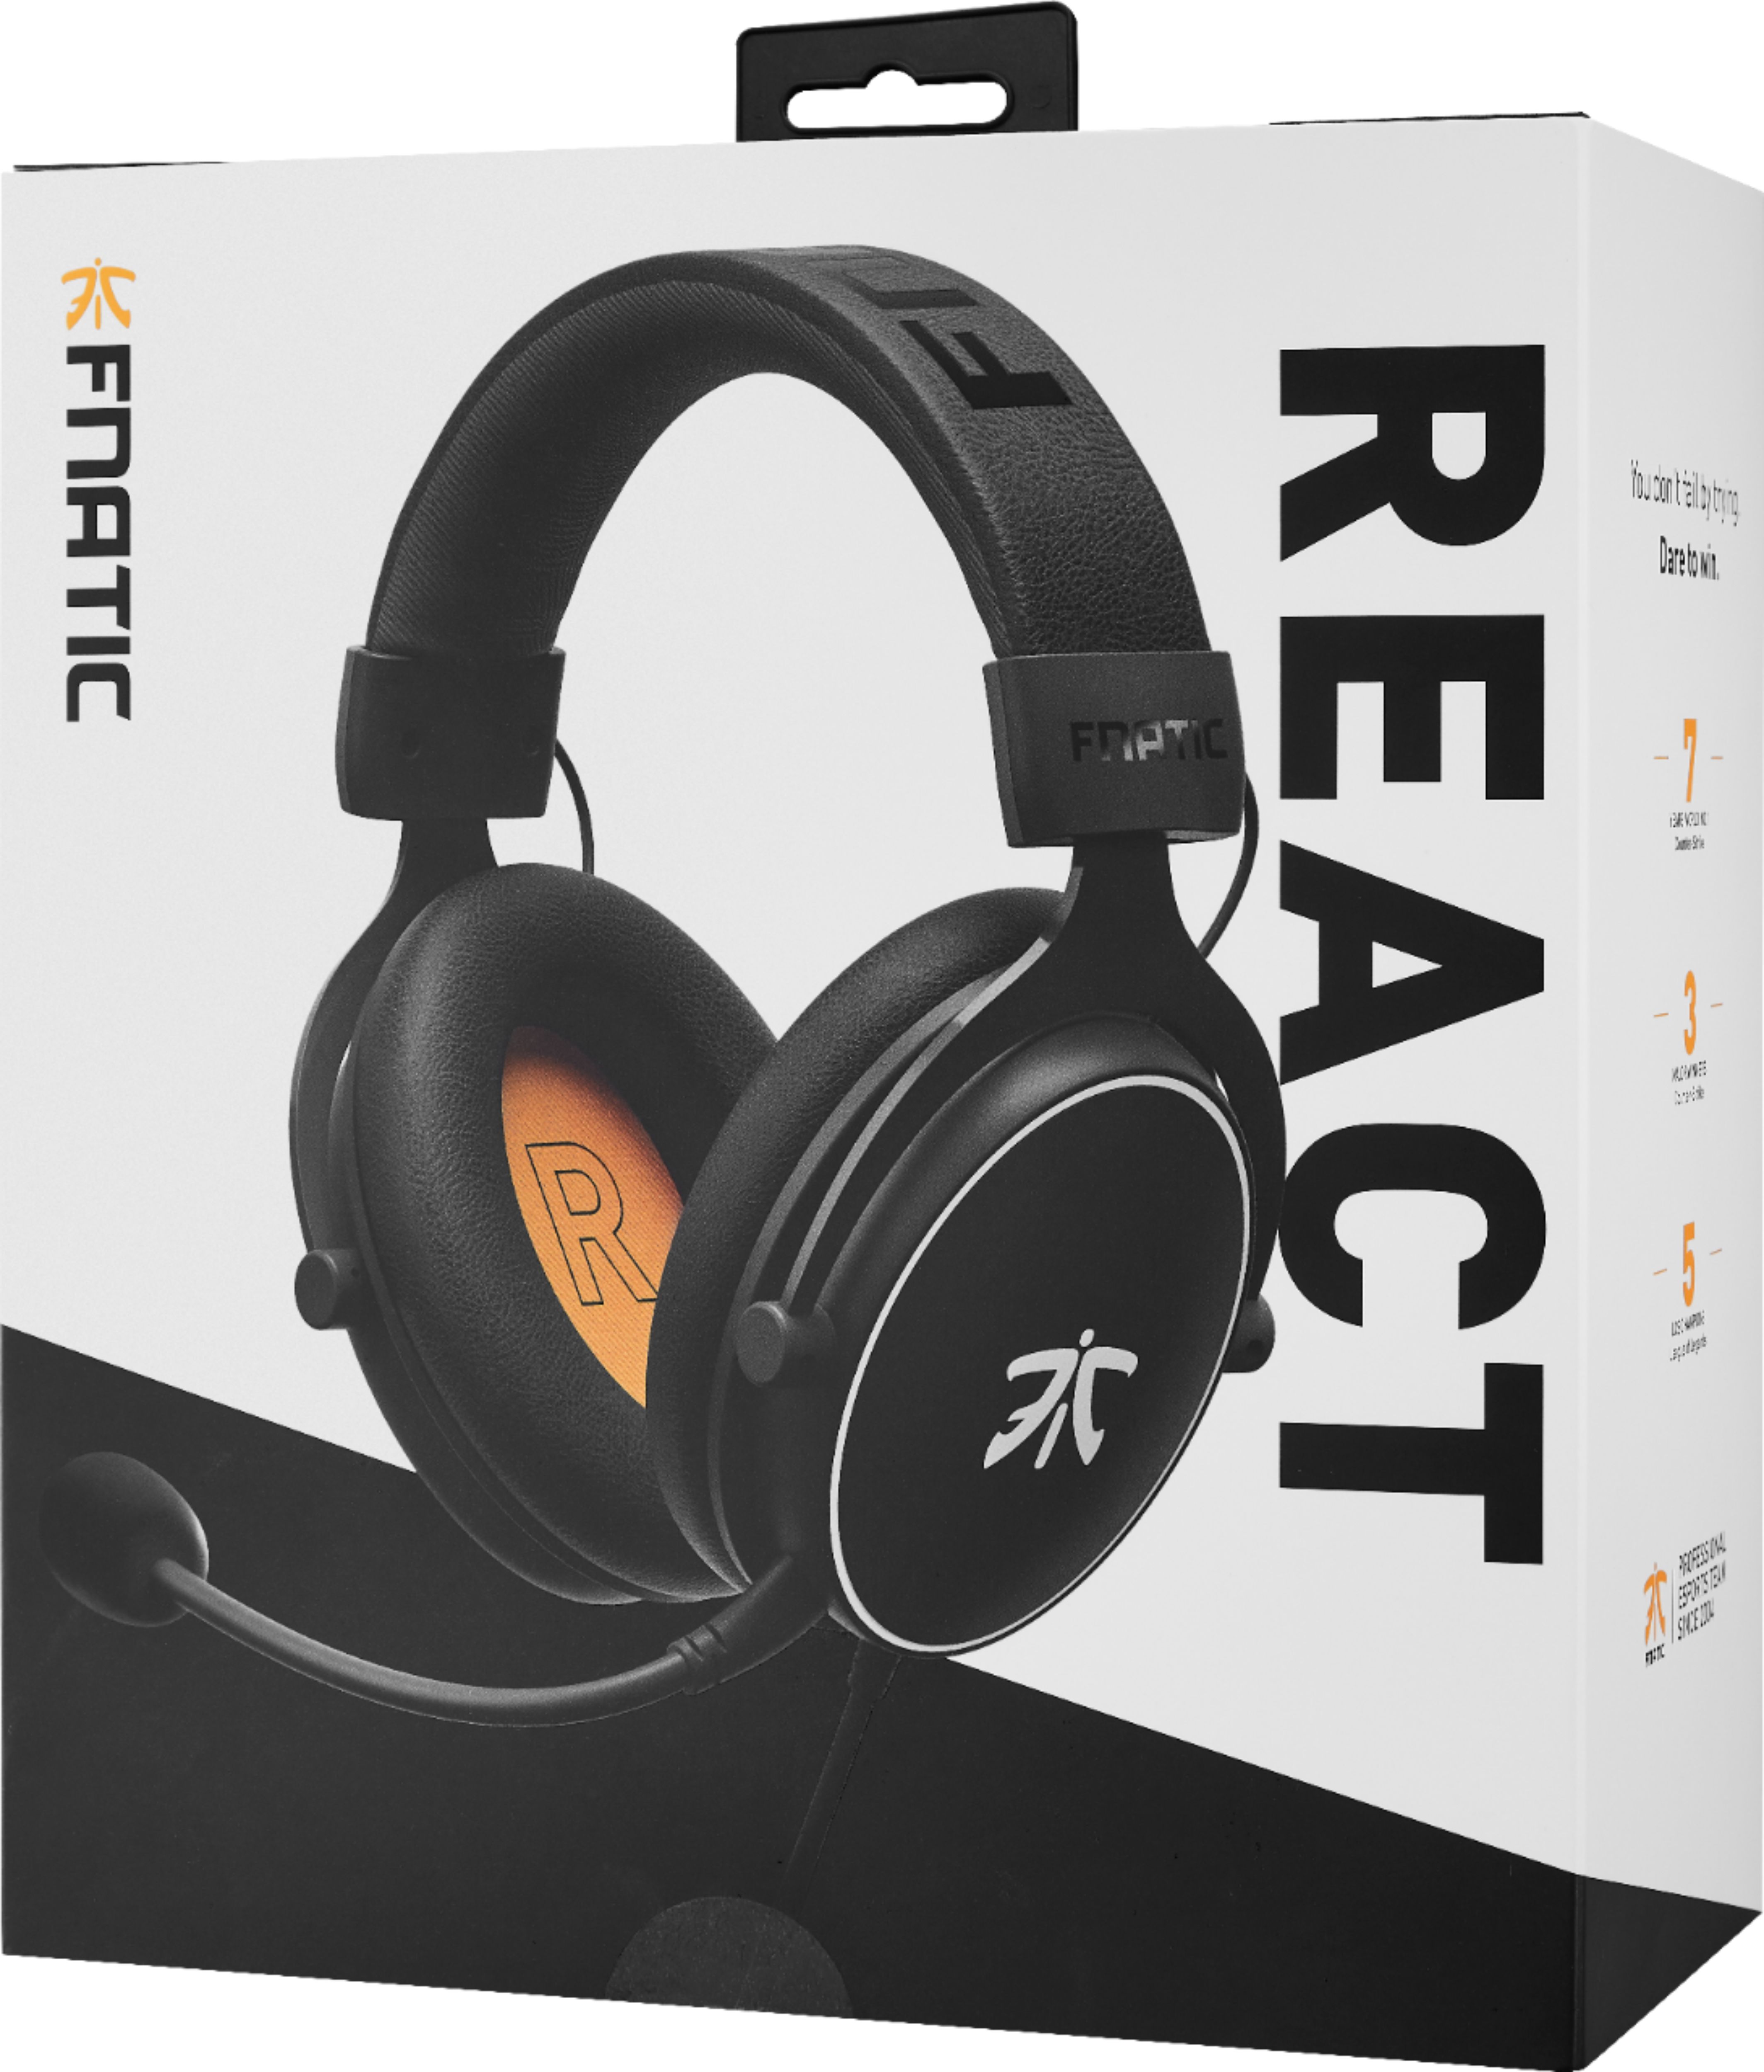 Best Buy: Fnatic REACT Wired Stereo Gaming Headset Black C-HS0003